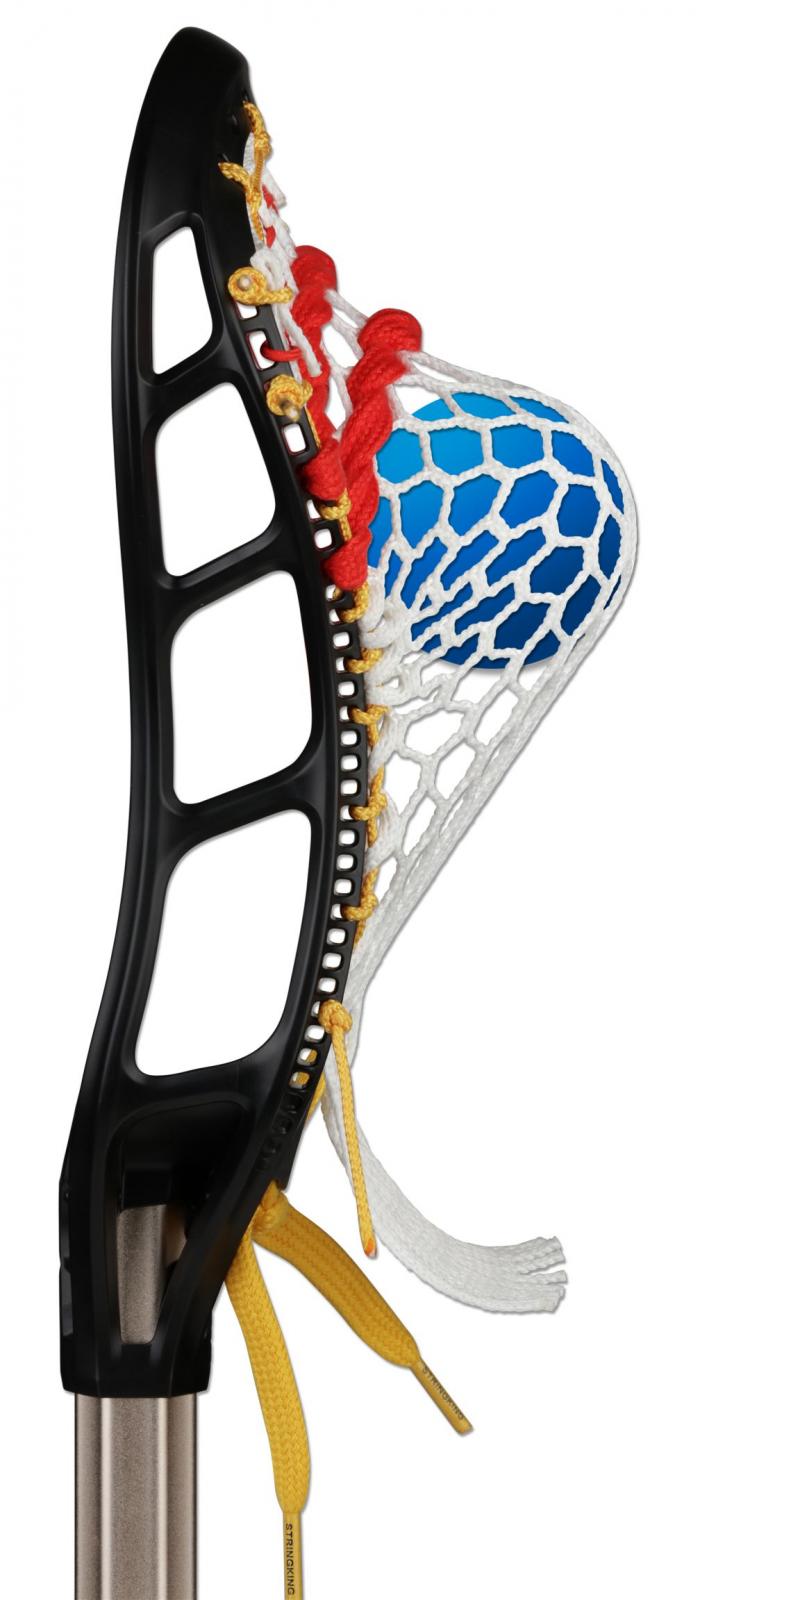 Looking For The Best Stringking Lacrosse Heads in 2023